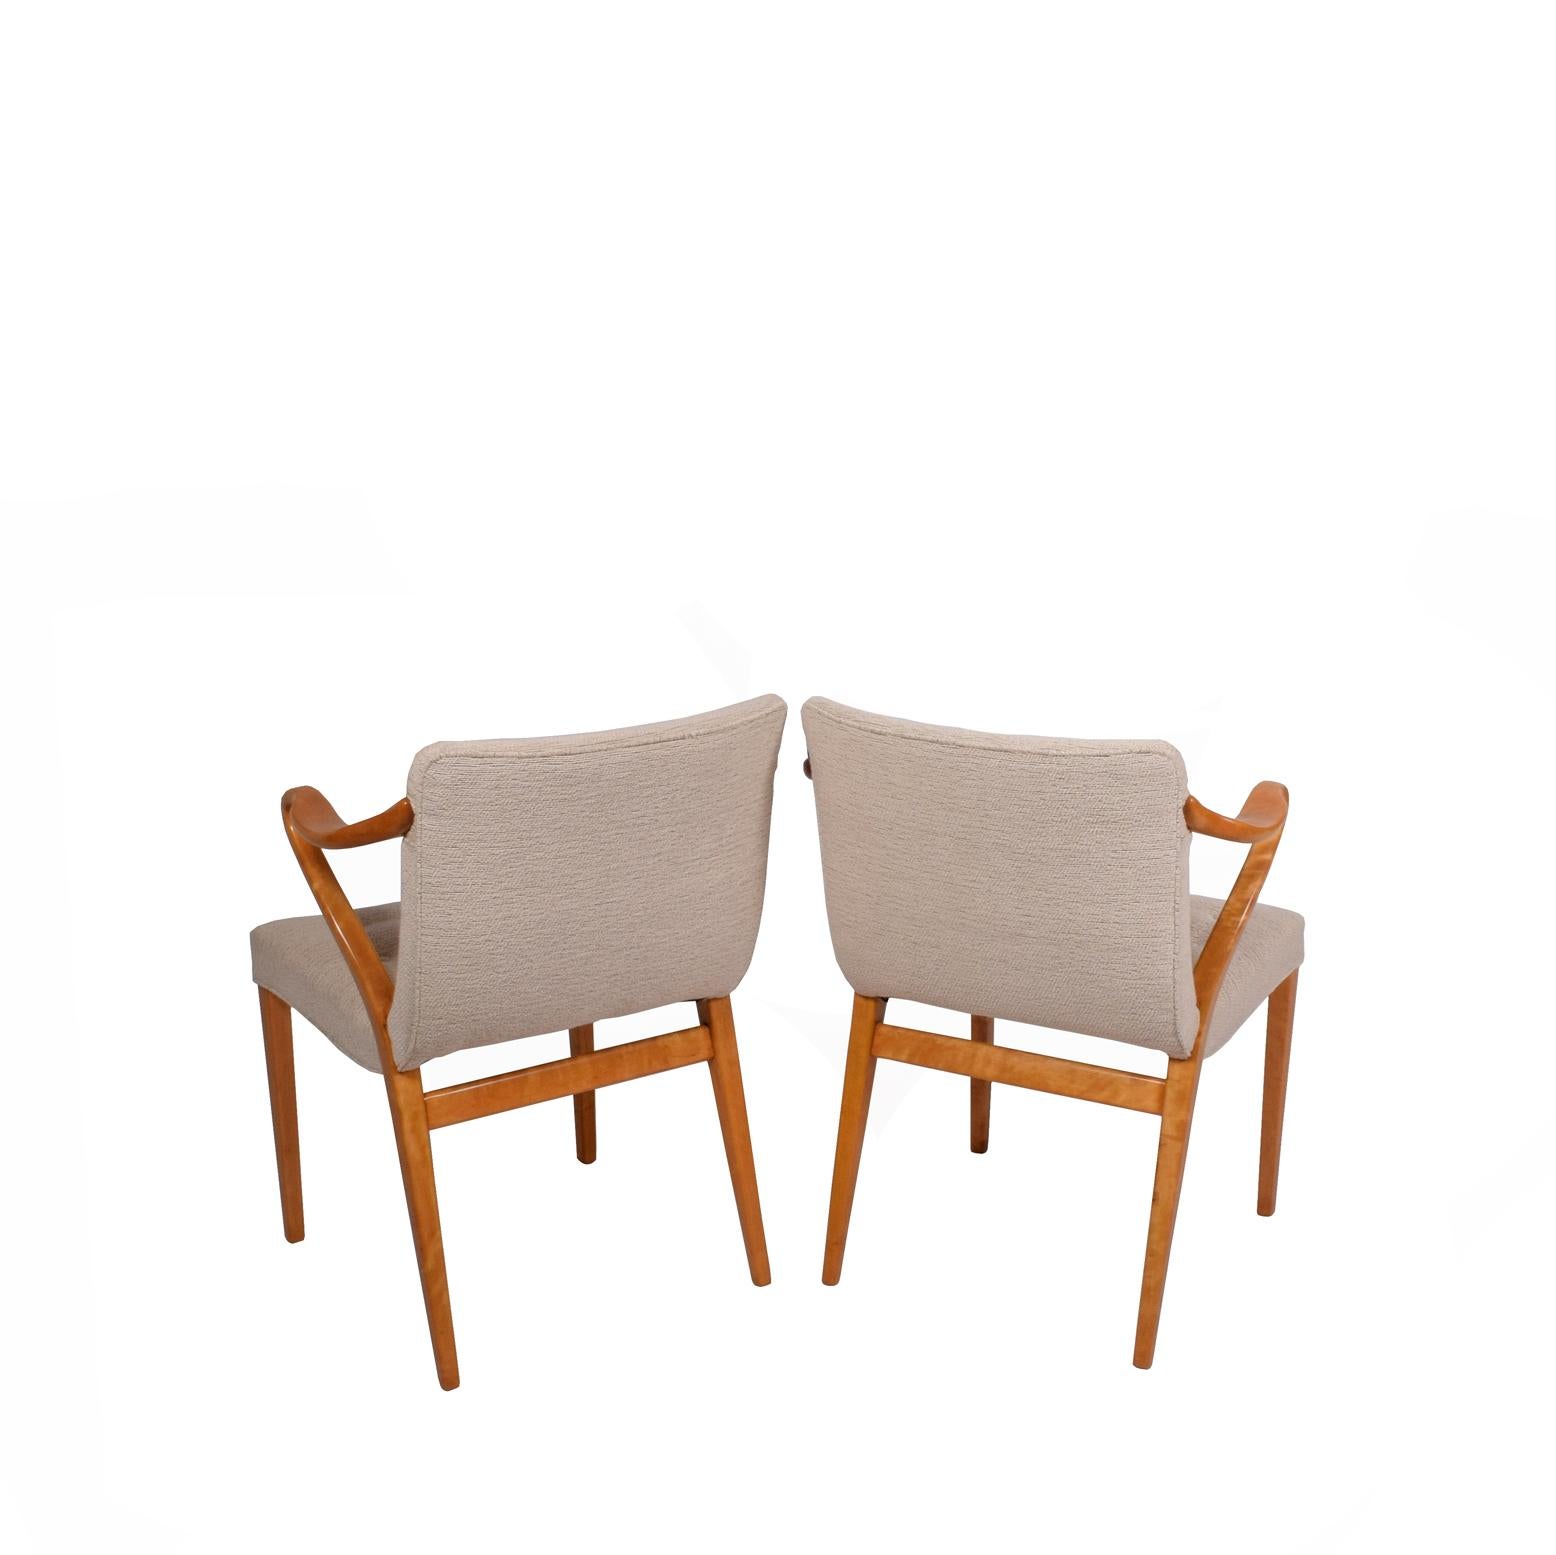 Scandinavian Modern Rare Pair of Armchairs by Axel Larsson for Bodafors, 1936 For Sale